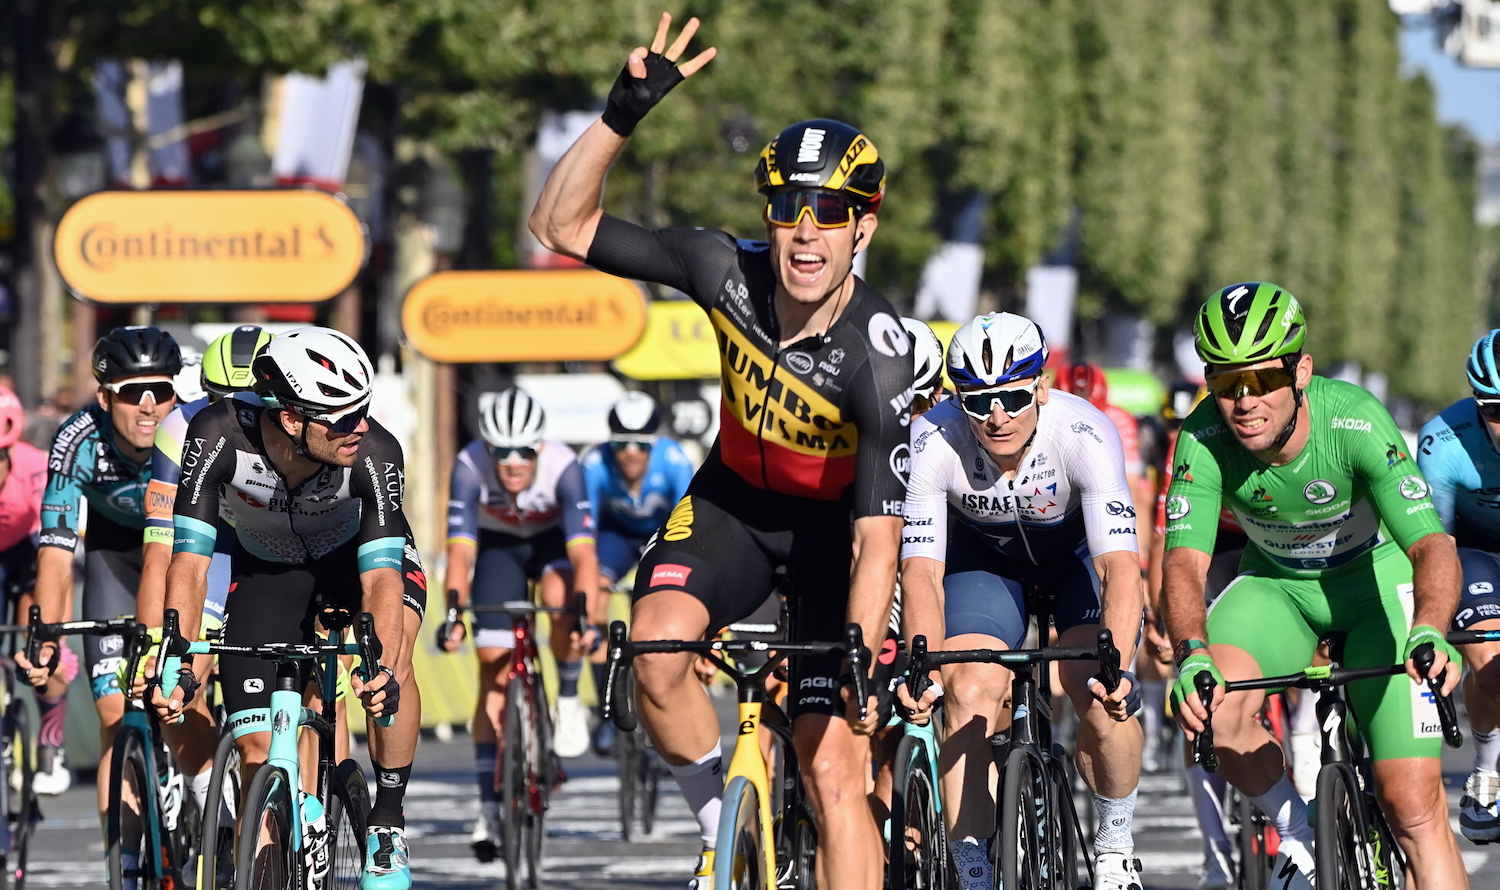 Belgian Wout Van Aert of Team Jumbo-Visma celebrates as he crosses the finish line to win the 21 and last stage of the 108th edition of the Tour de France cycling race, 108,4 km from Chatou to Paris in France, Sunday 18 July 2021. This year's Tour de France takes place from 26 June to 18 July 2021.